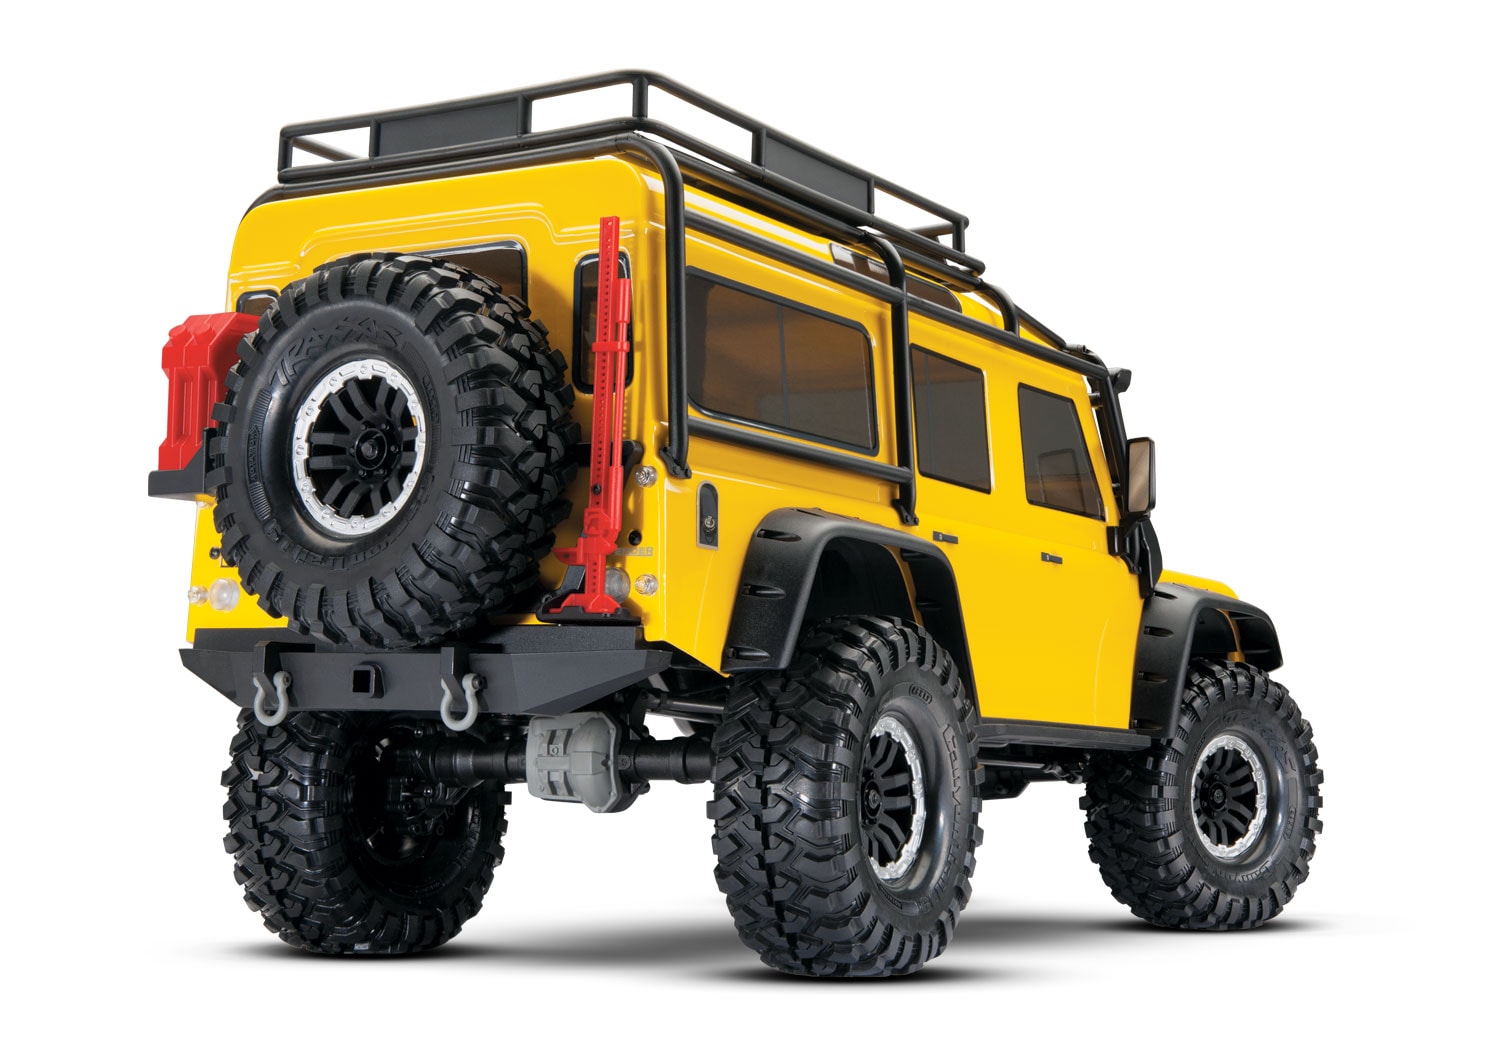 Traxxas TRX-4 Special Edition Yellow Land Rover Defender - Rear